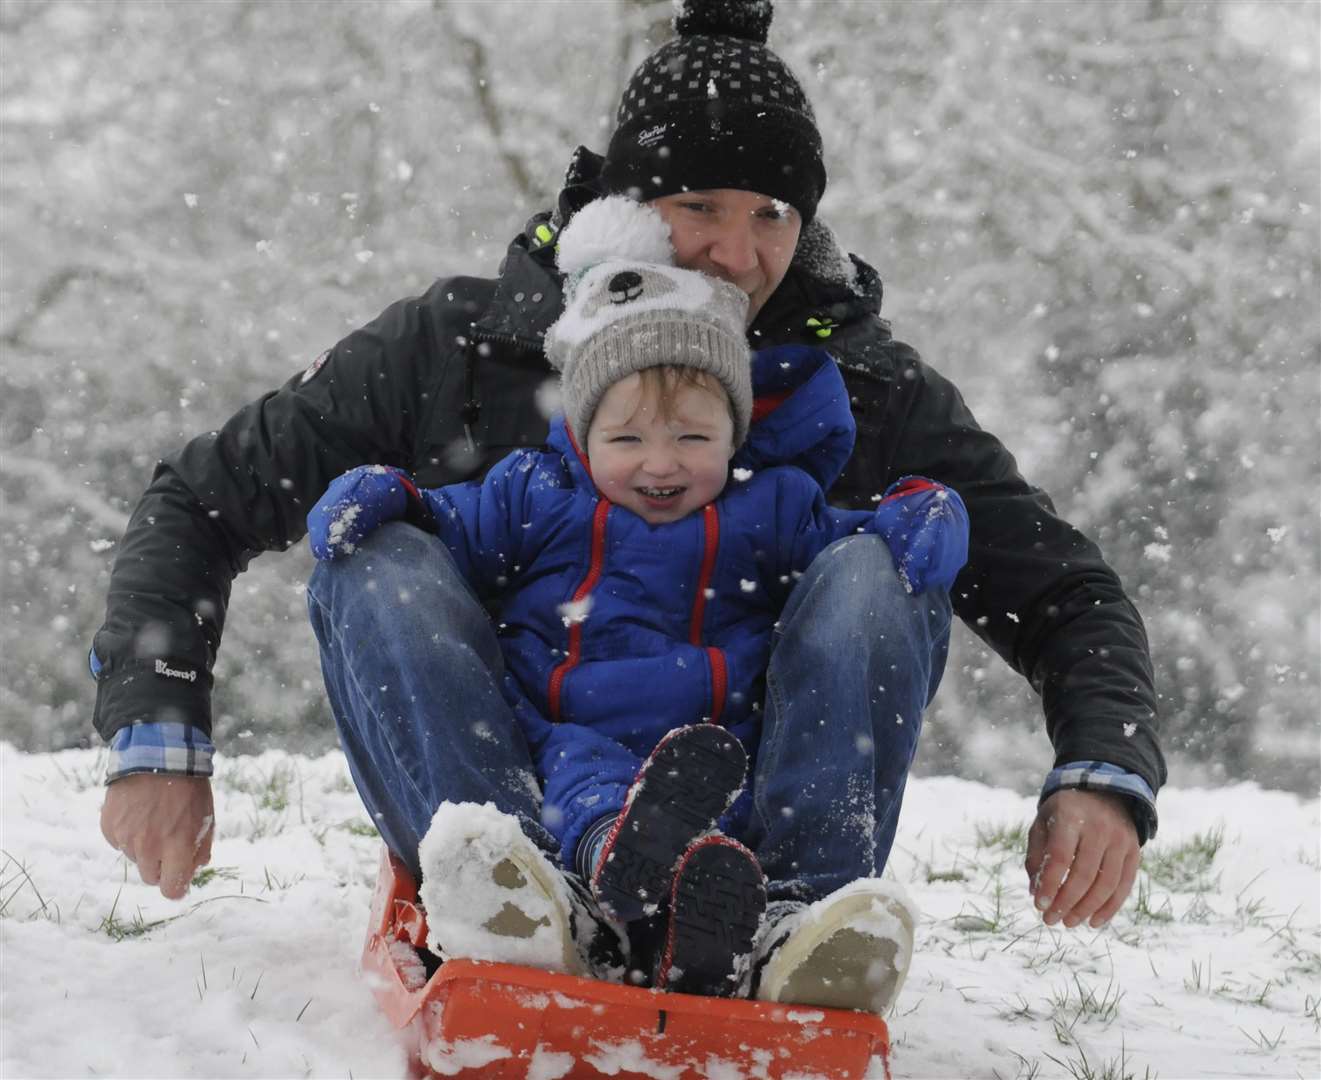 Ian McLeod with his son Dylan at Victoria Park in Ashford during a snowy spell earlier this year